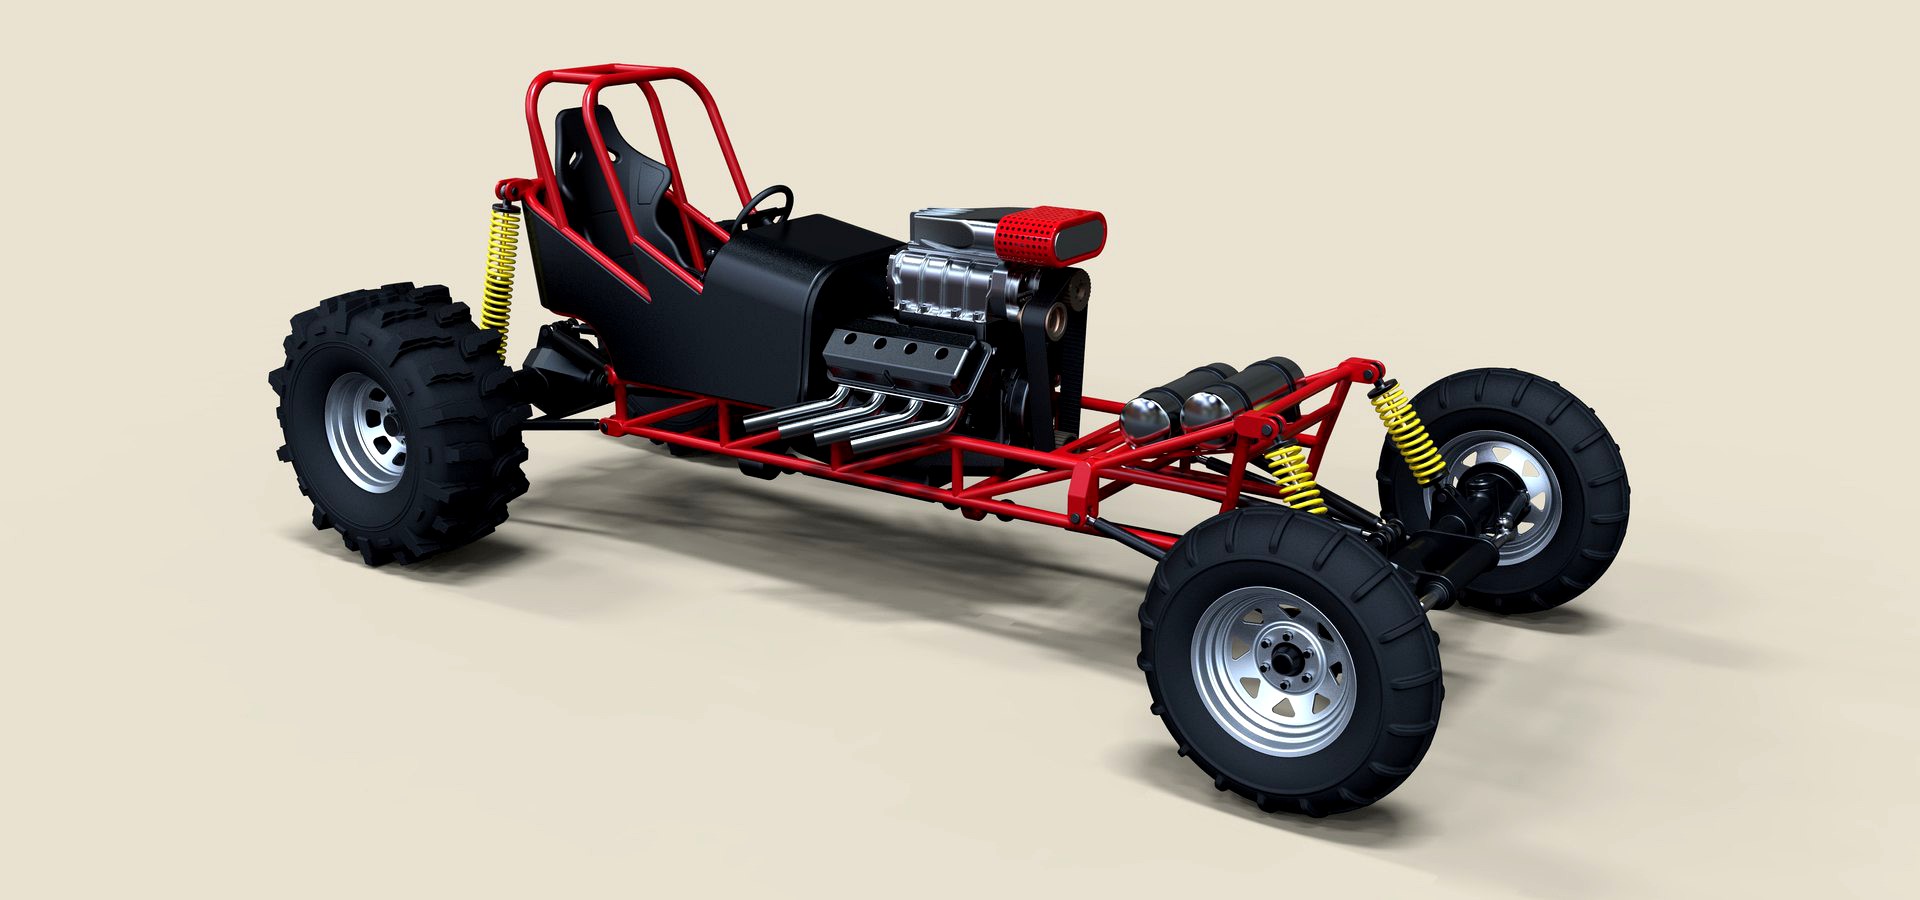 Mud dragster